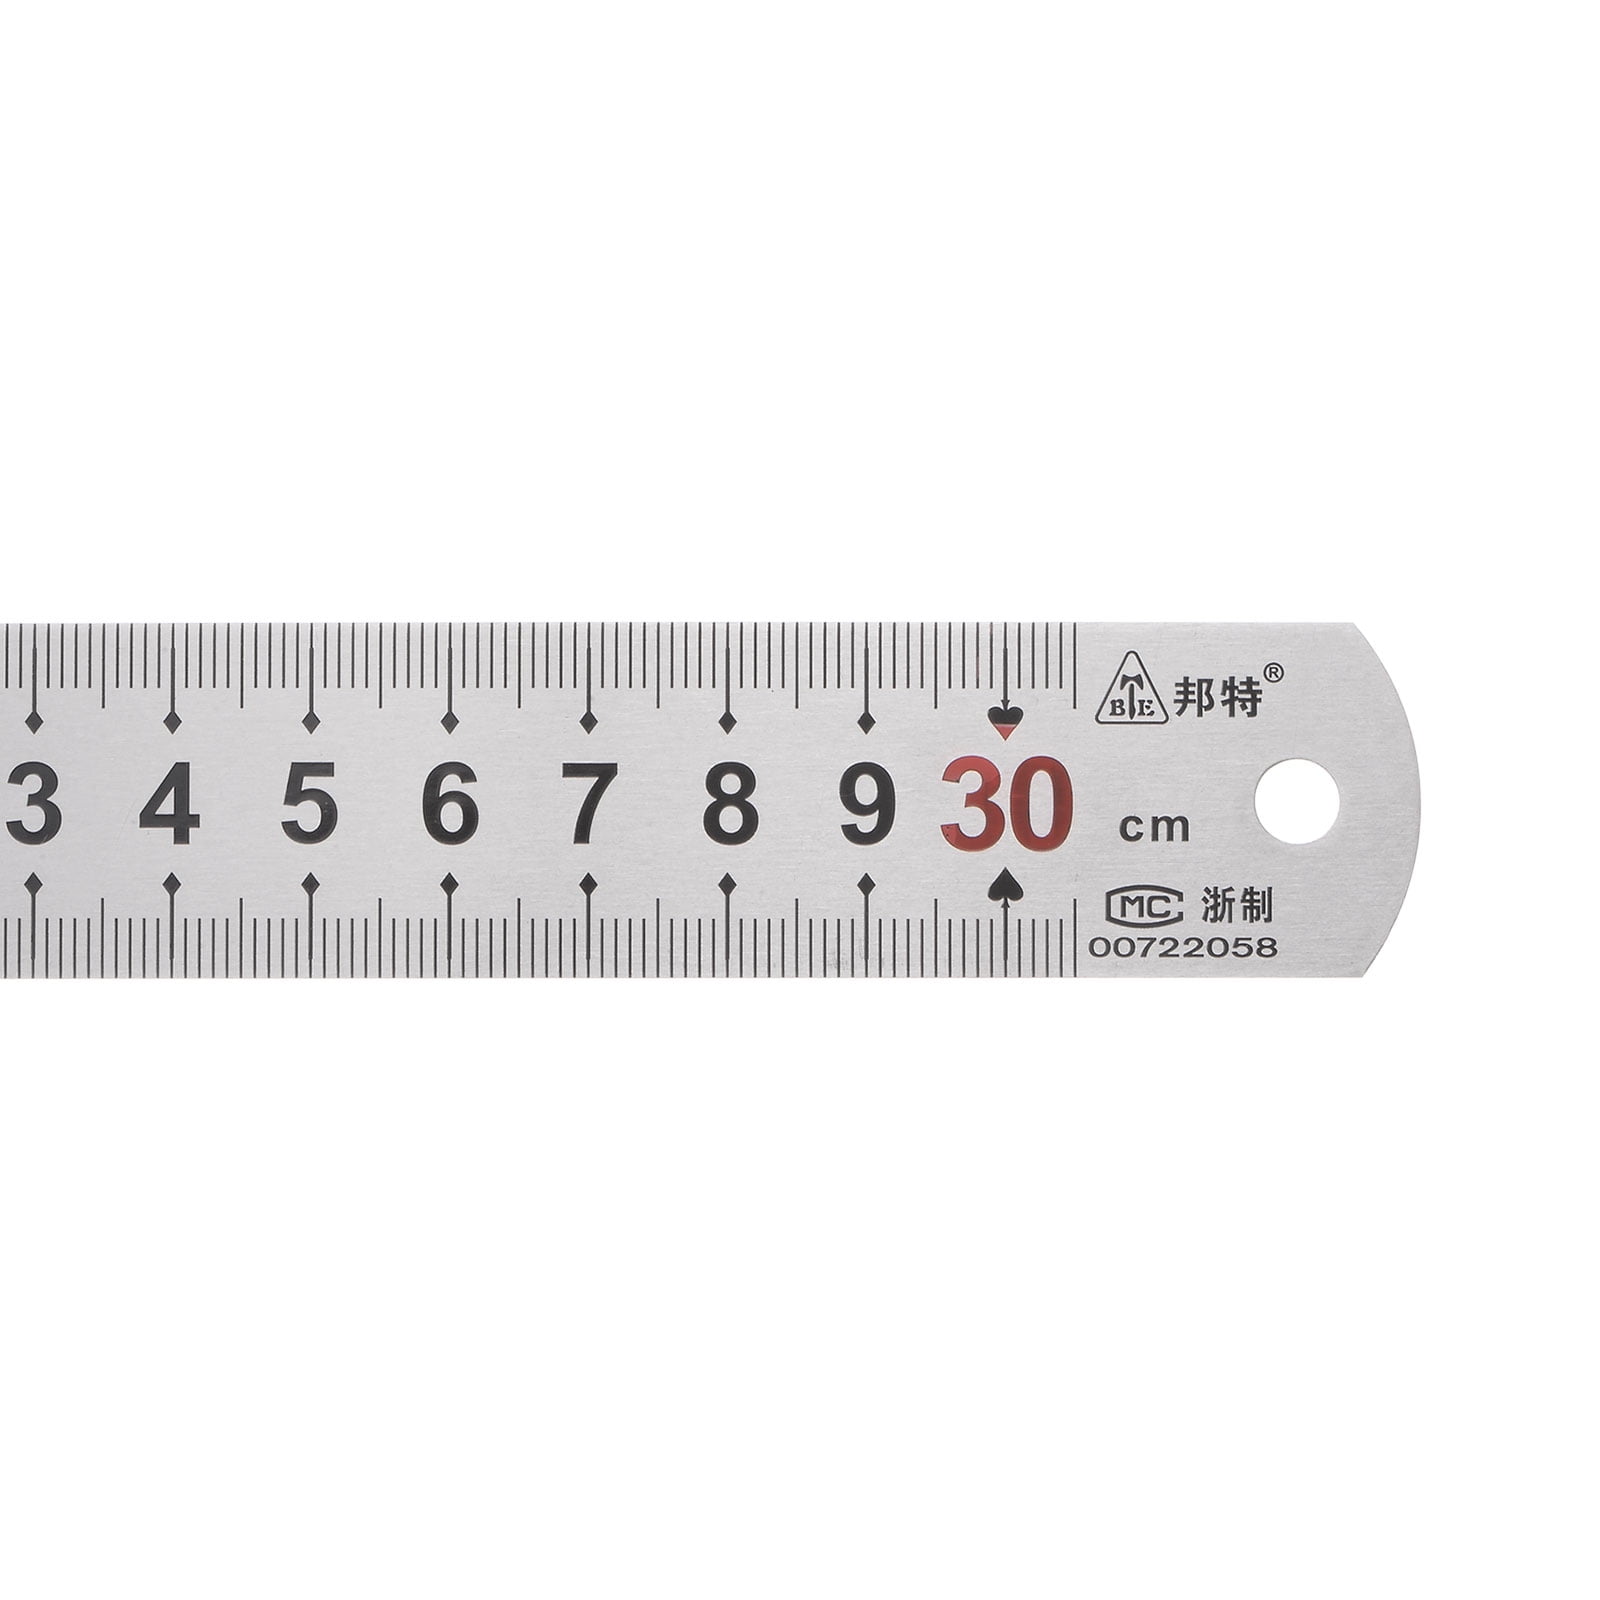 Westcott Plastic Ruler, 6, Metric; Imperial, , 0.5 lb., for Office,  Assorted Colors, 2-Pack 